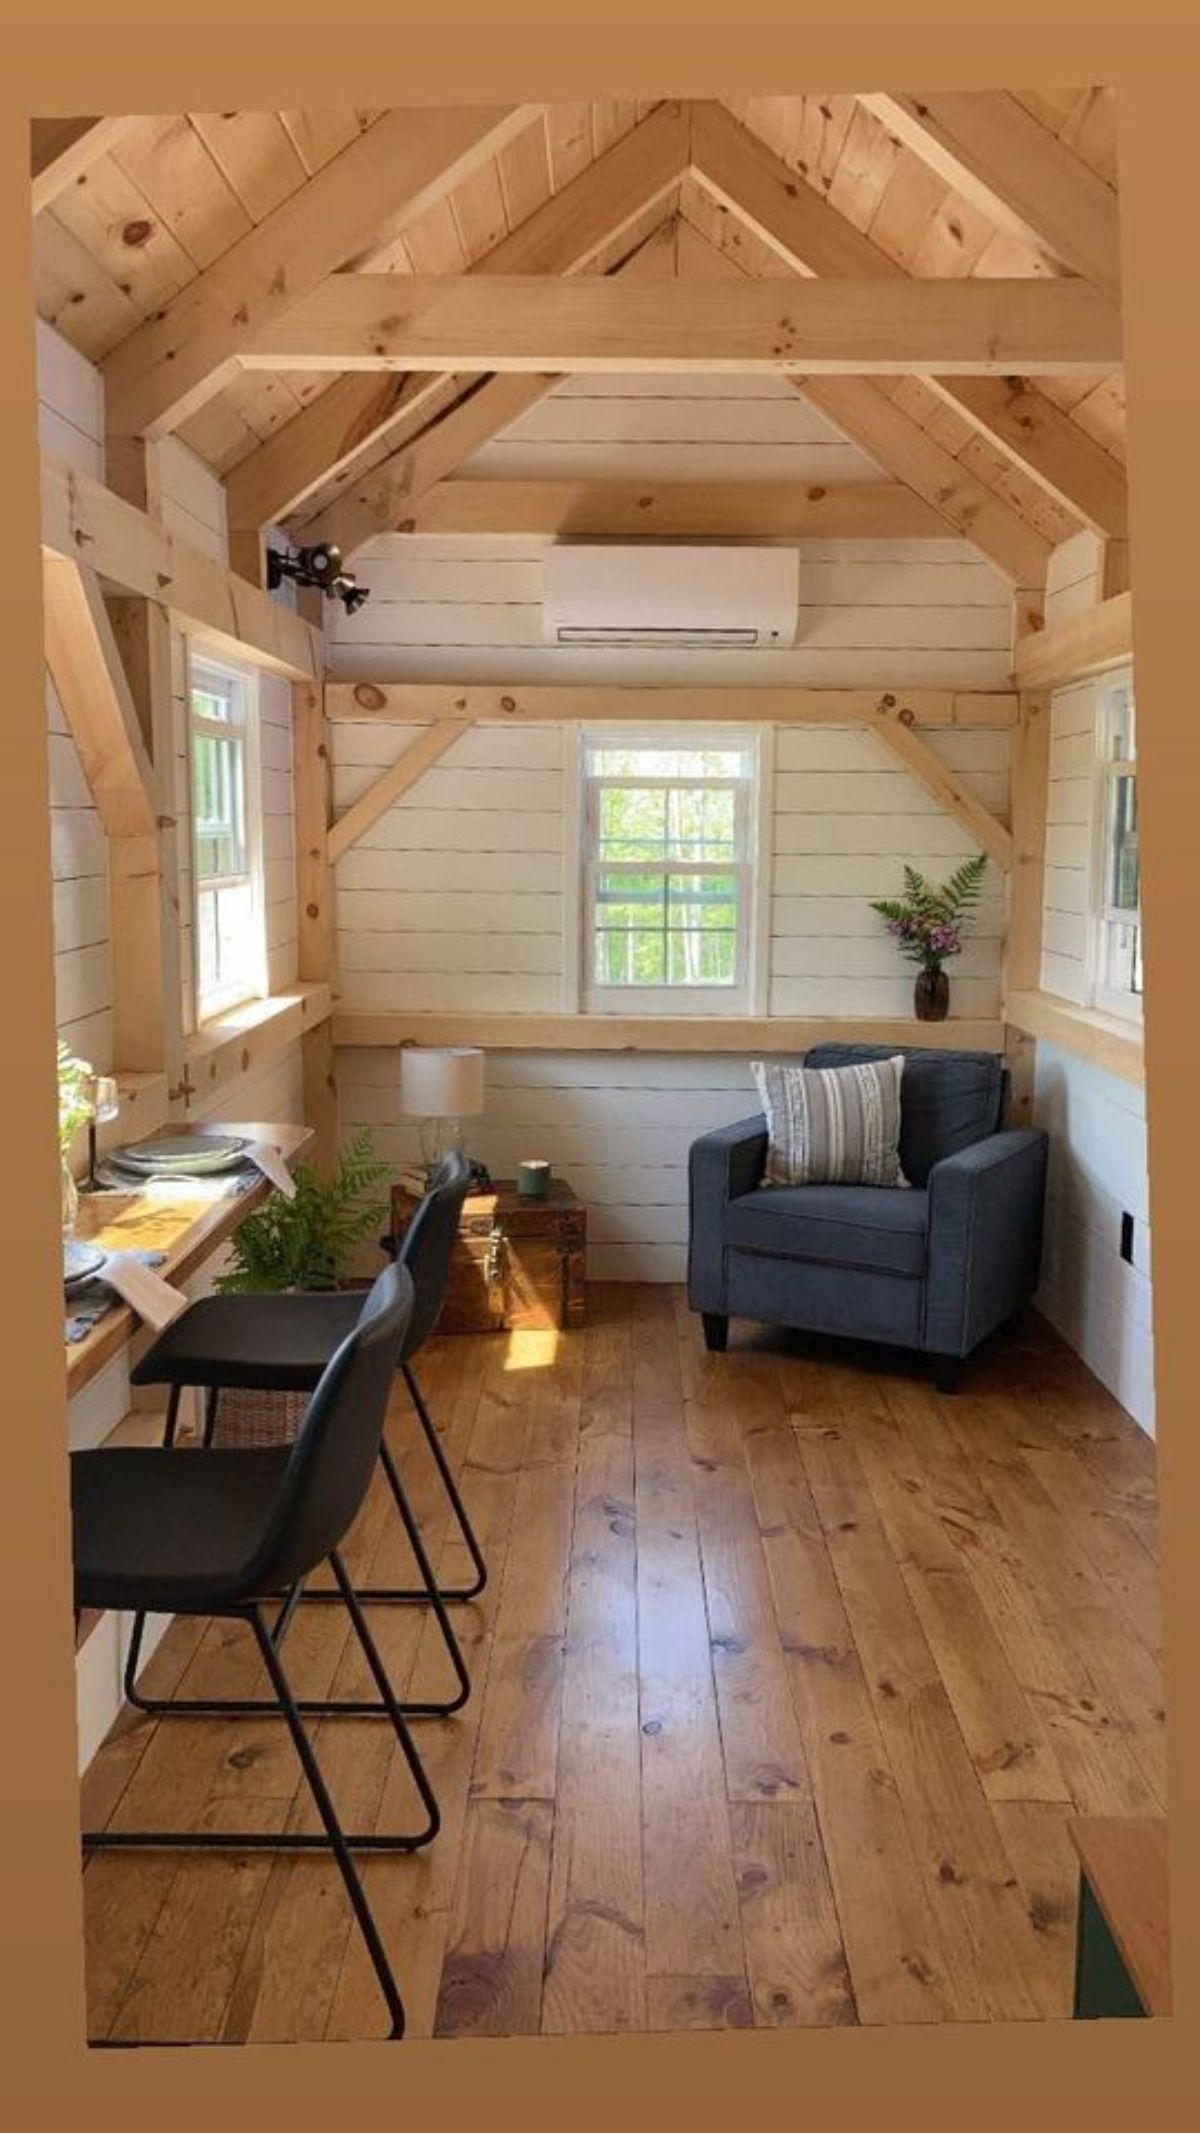 Living room of 26’ Timber Framed Tiny House has single seater couch and dining table with 2 chairs